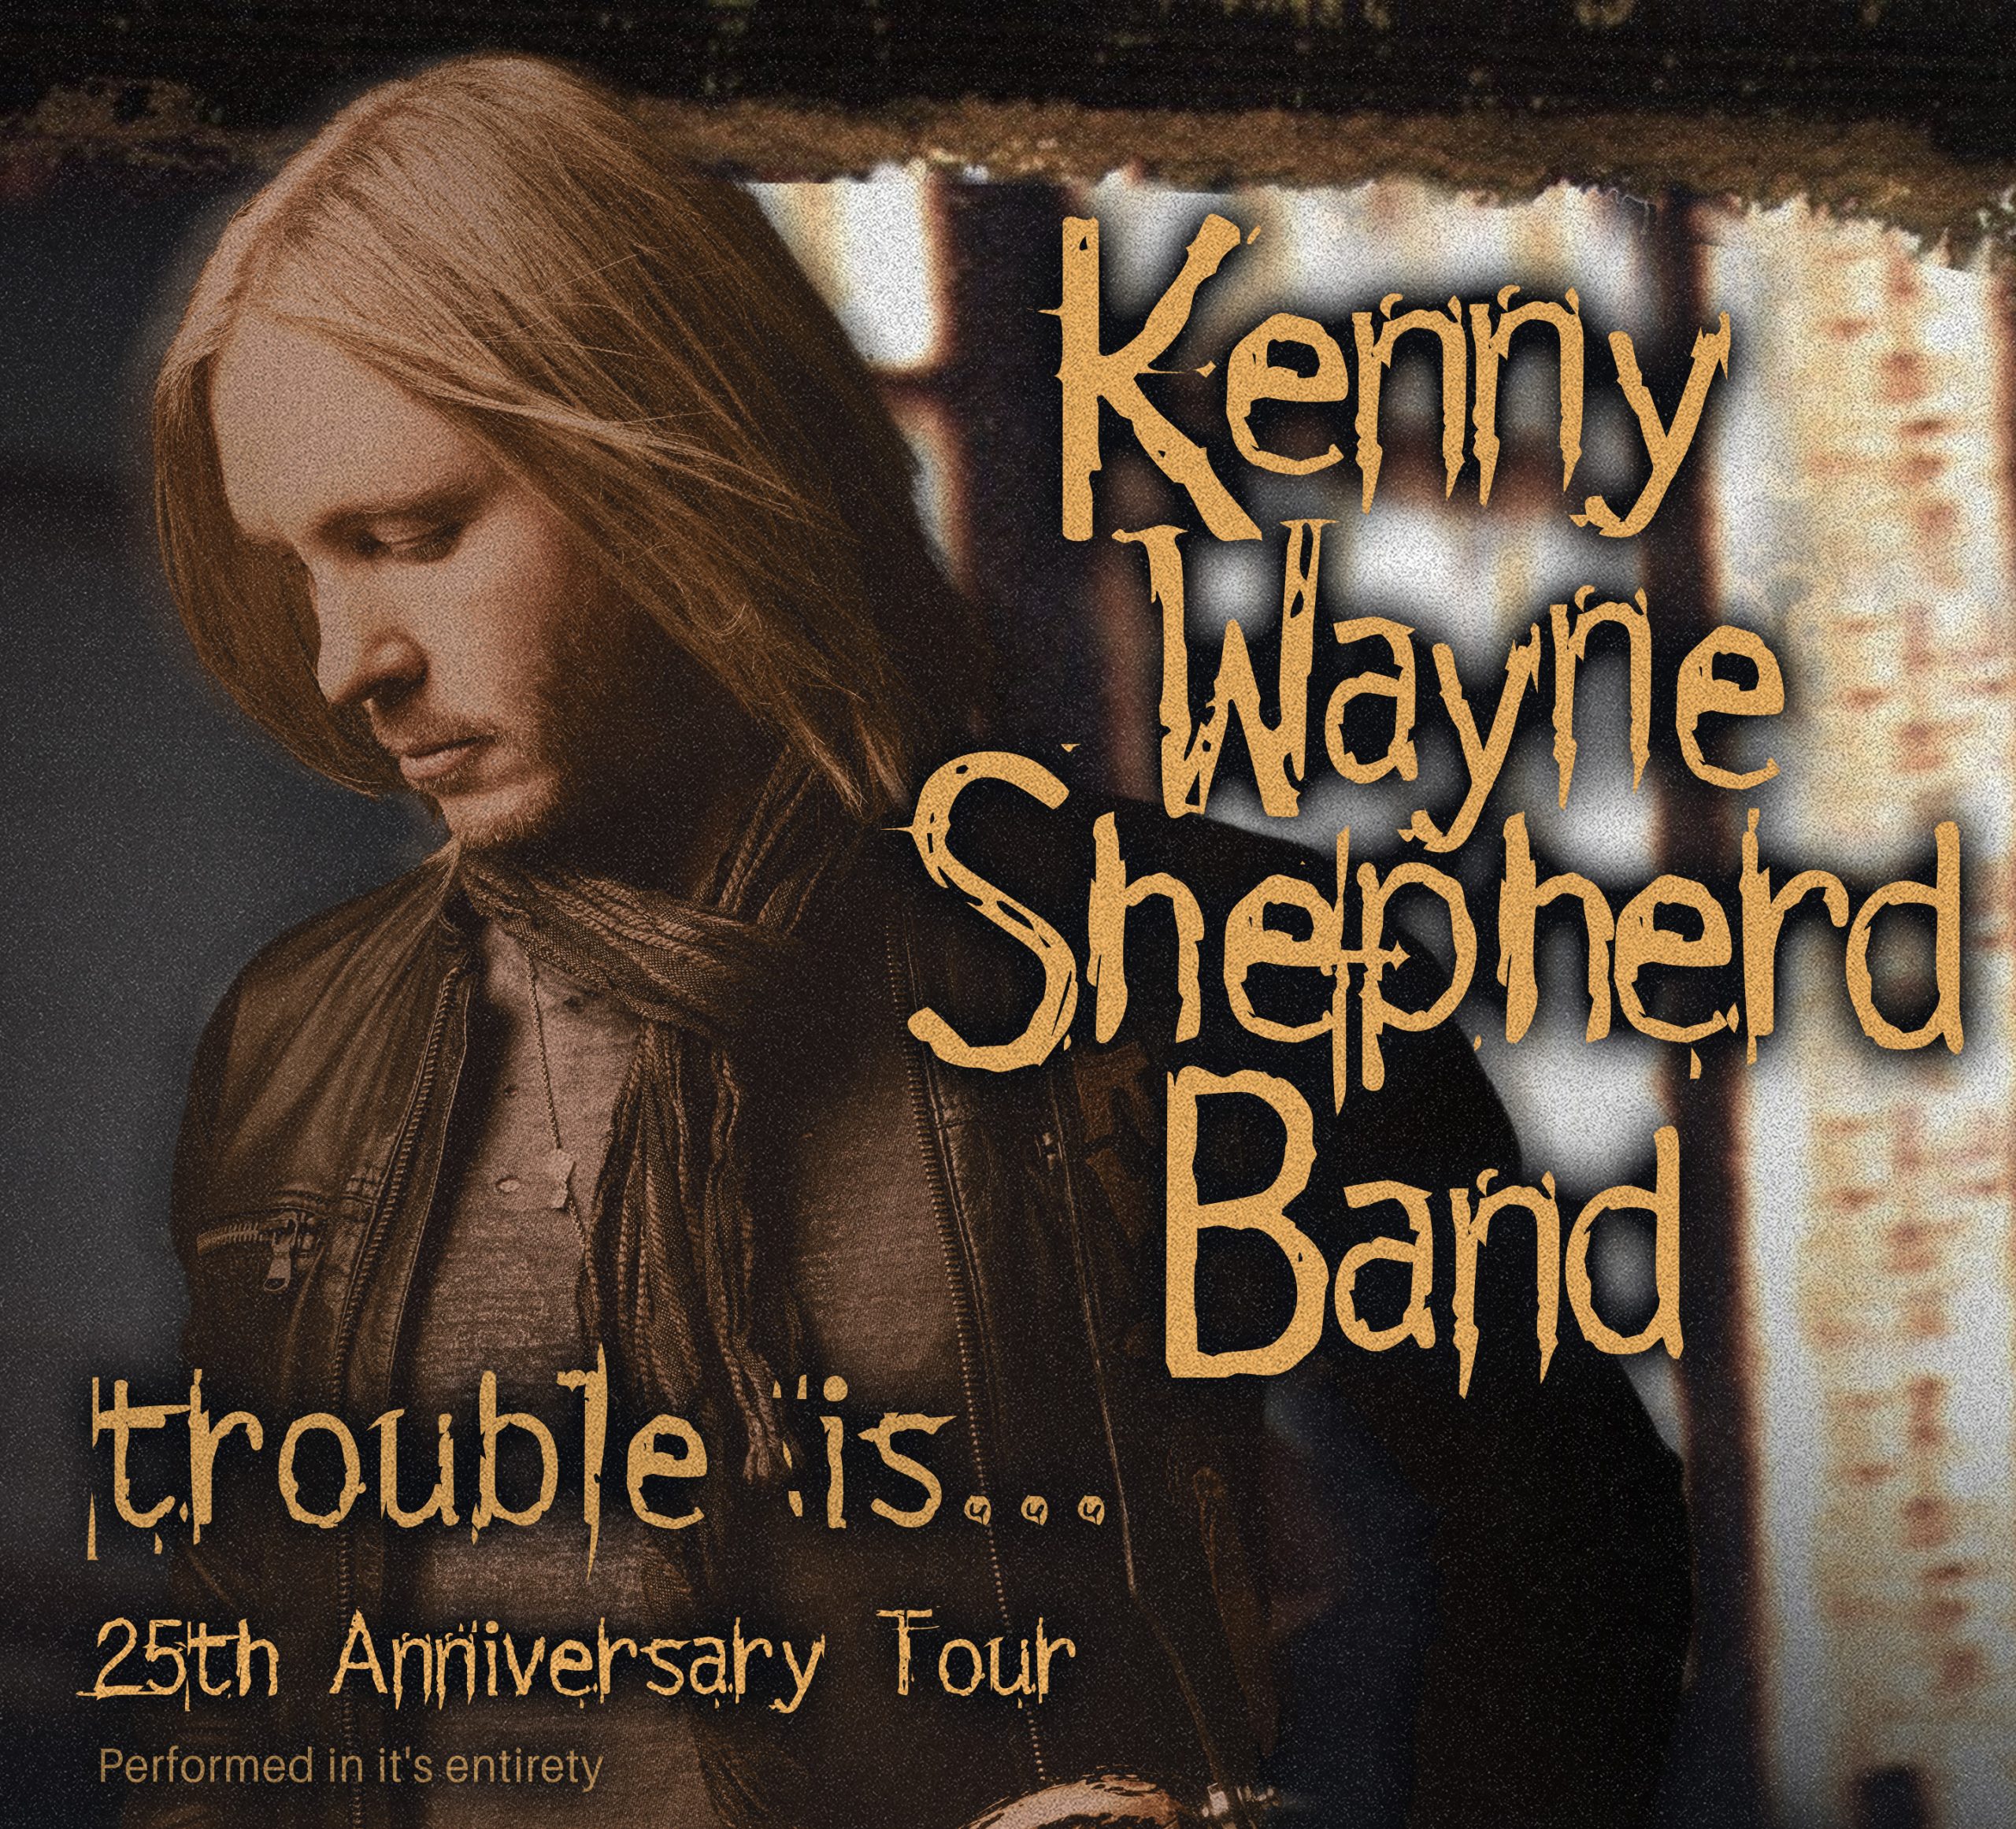 The Kenny Wayne Shepherd Band poster for the "Trouble is... 25th Anniversary Tour."